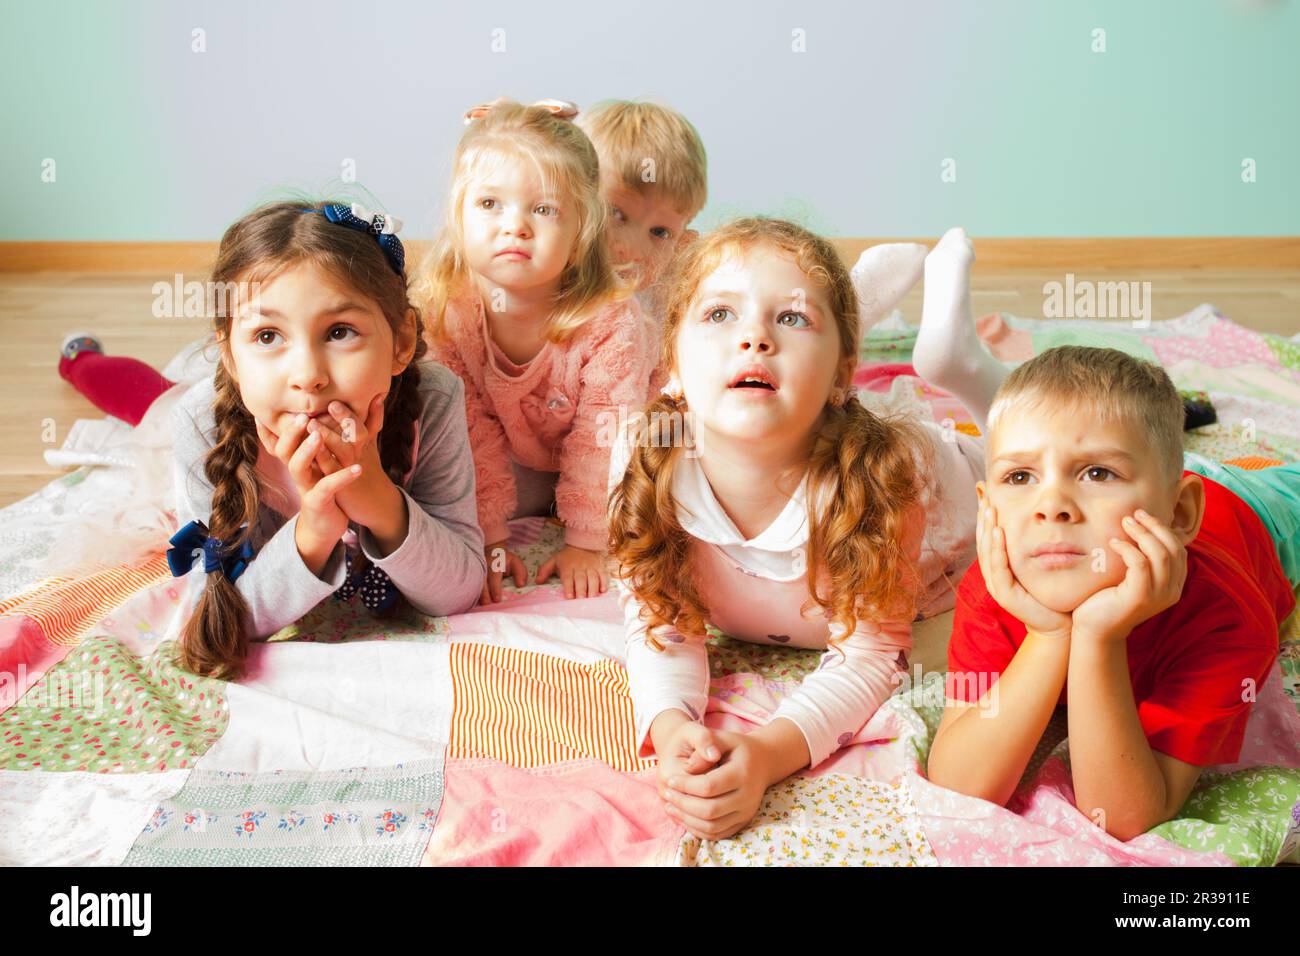 Close view of five kids laying on a floor Stock Photo